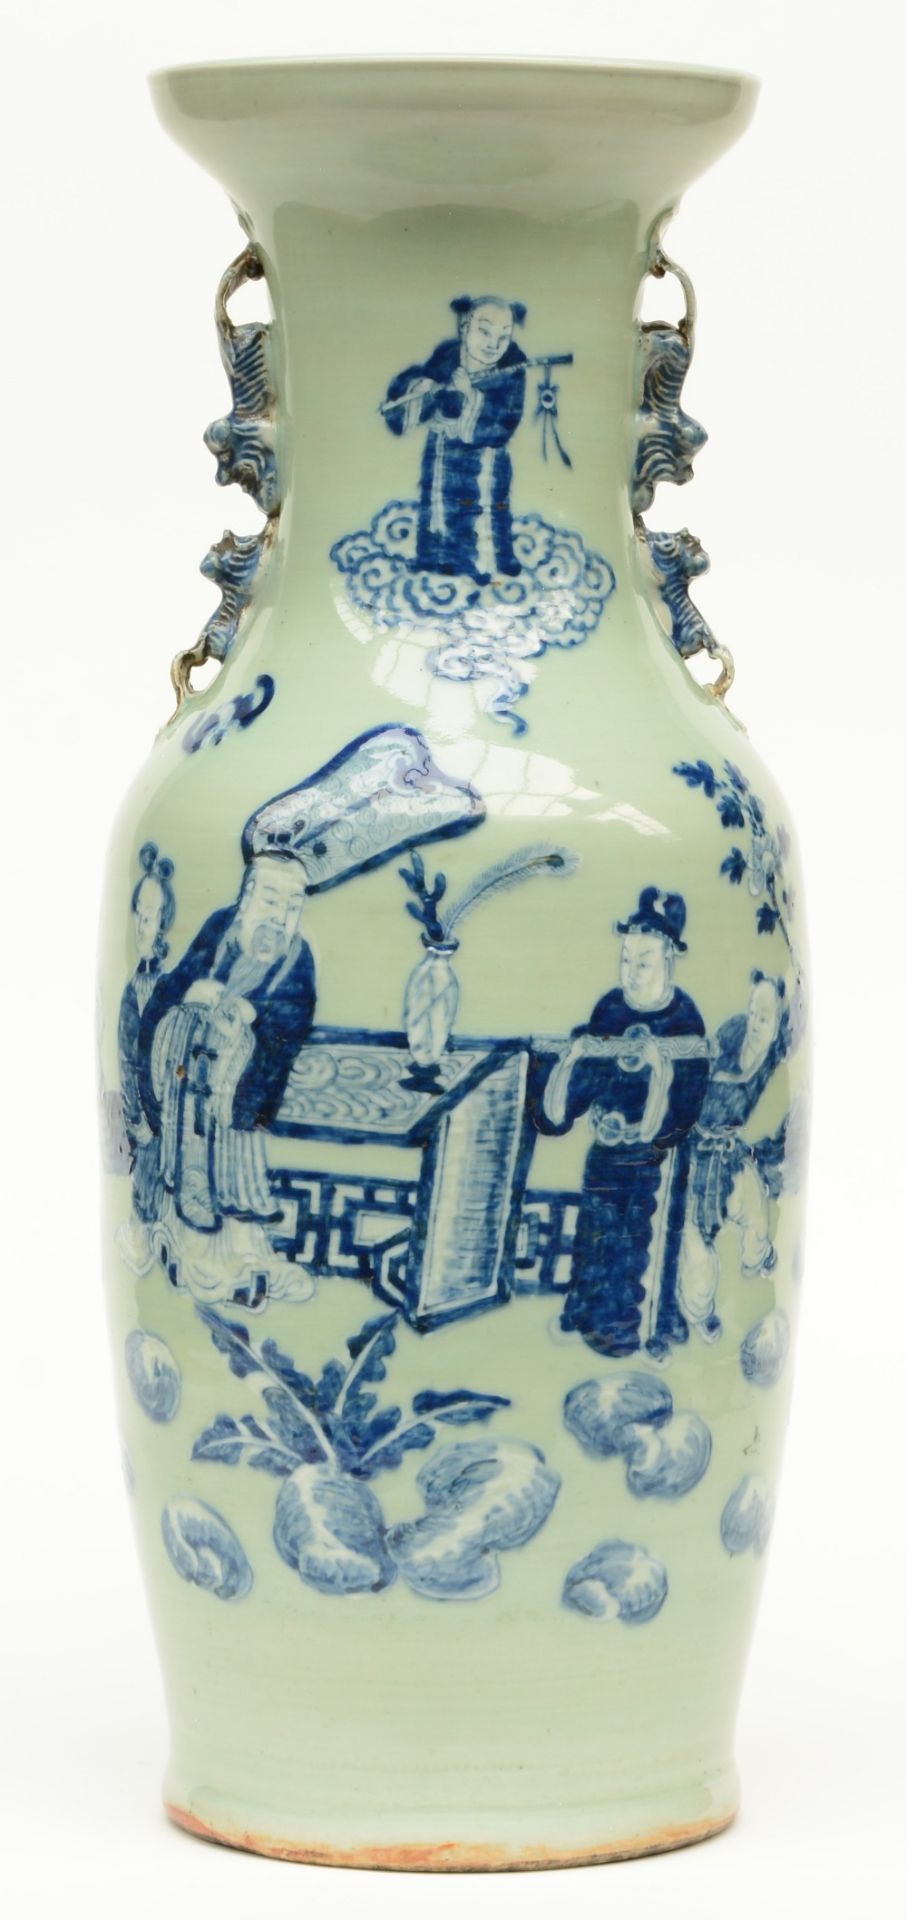 A Chinese celadon ground vase, blue and white decorated with an animated scene, 19thC, H 60 cm (